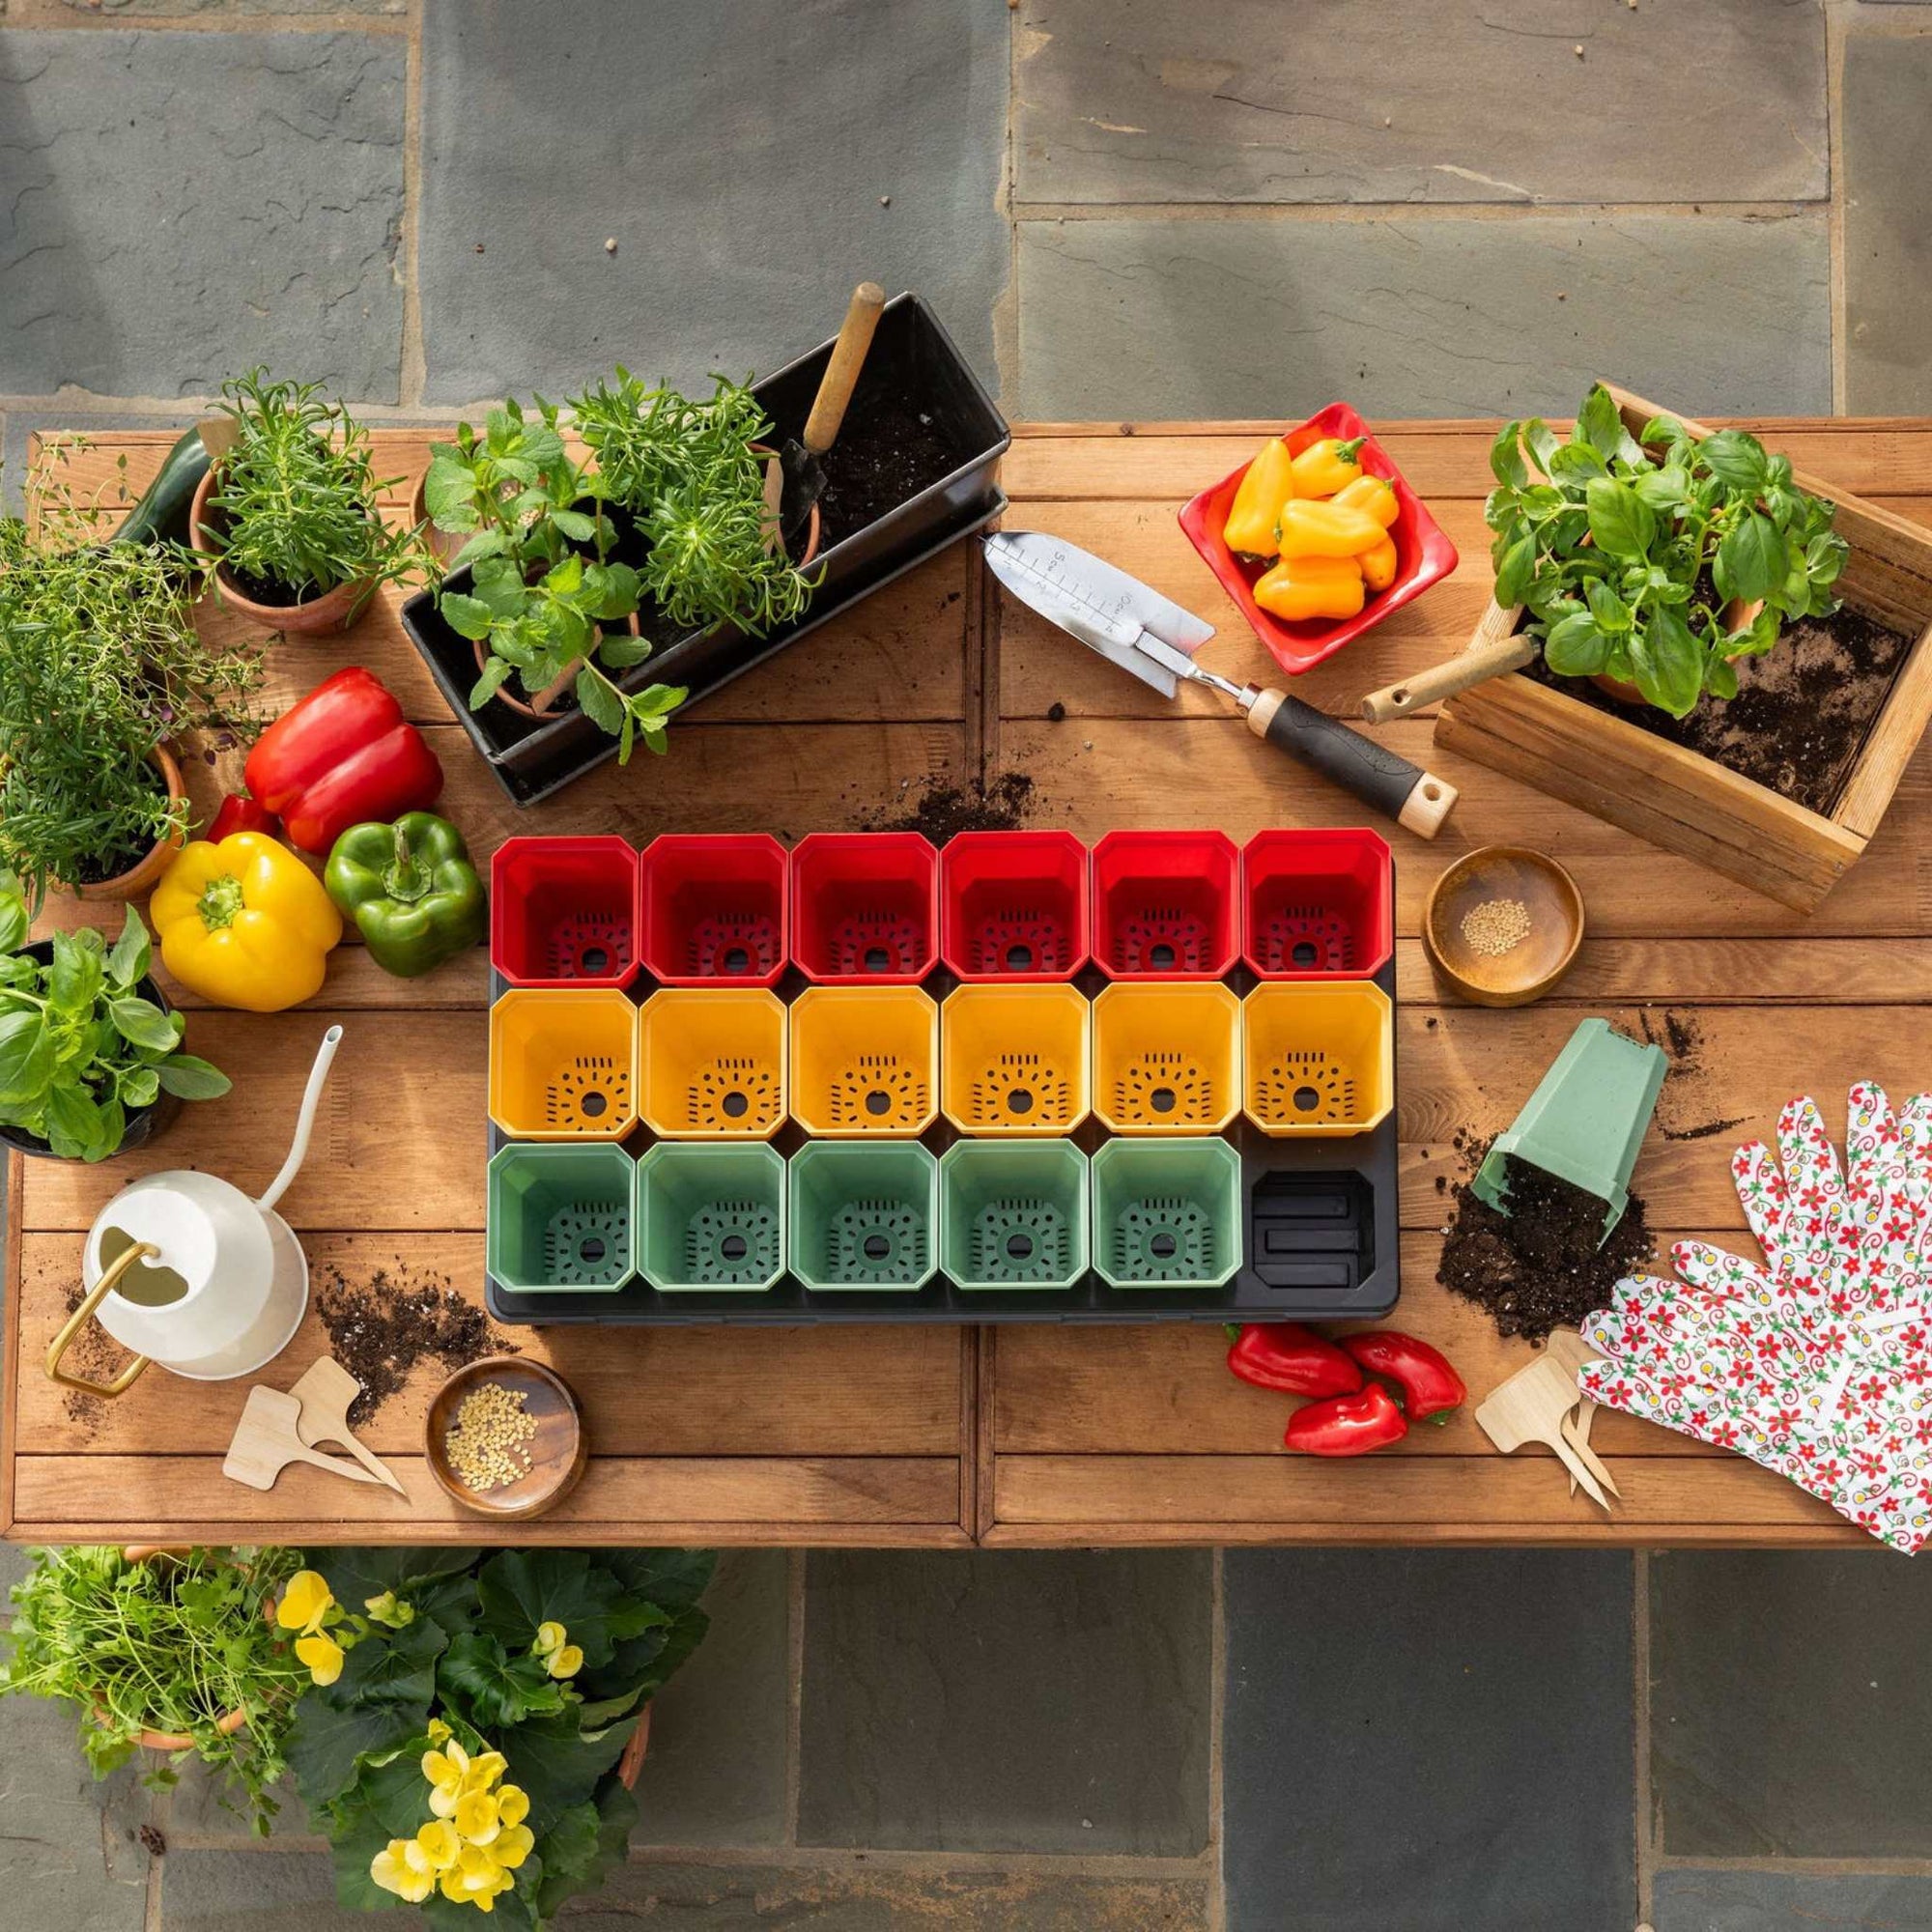 Overhead view of a wooden planting table with red, green, and yellow 3 inch pots in a dark grey 1020 tray with insert holder. Also on the table are young plants, peppers, watering can, and pepper seeds.